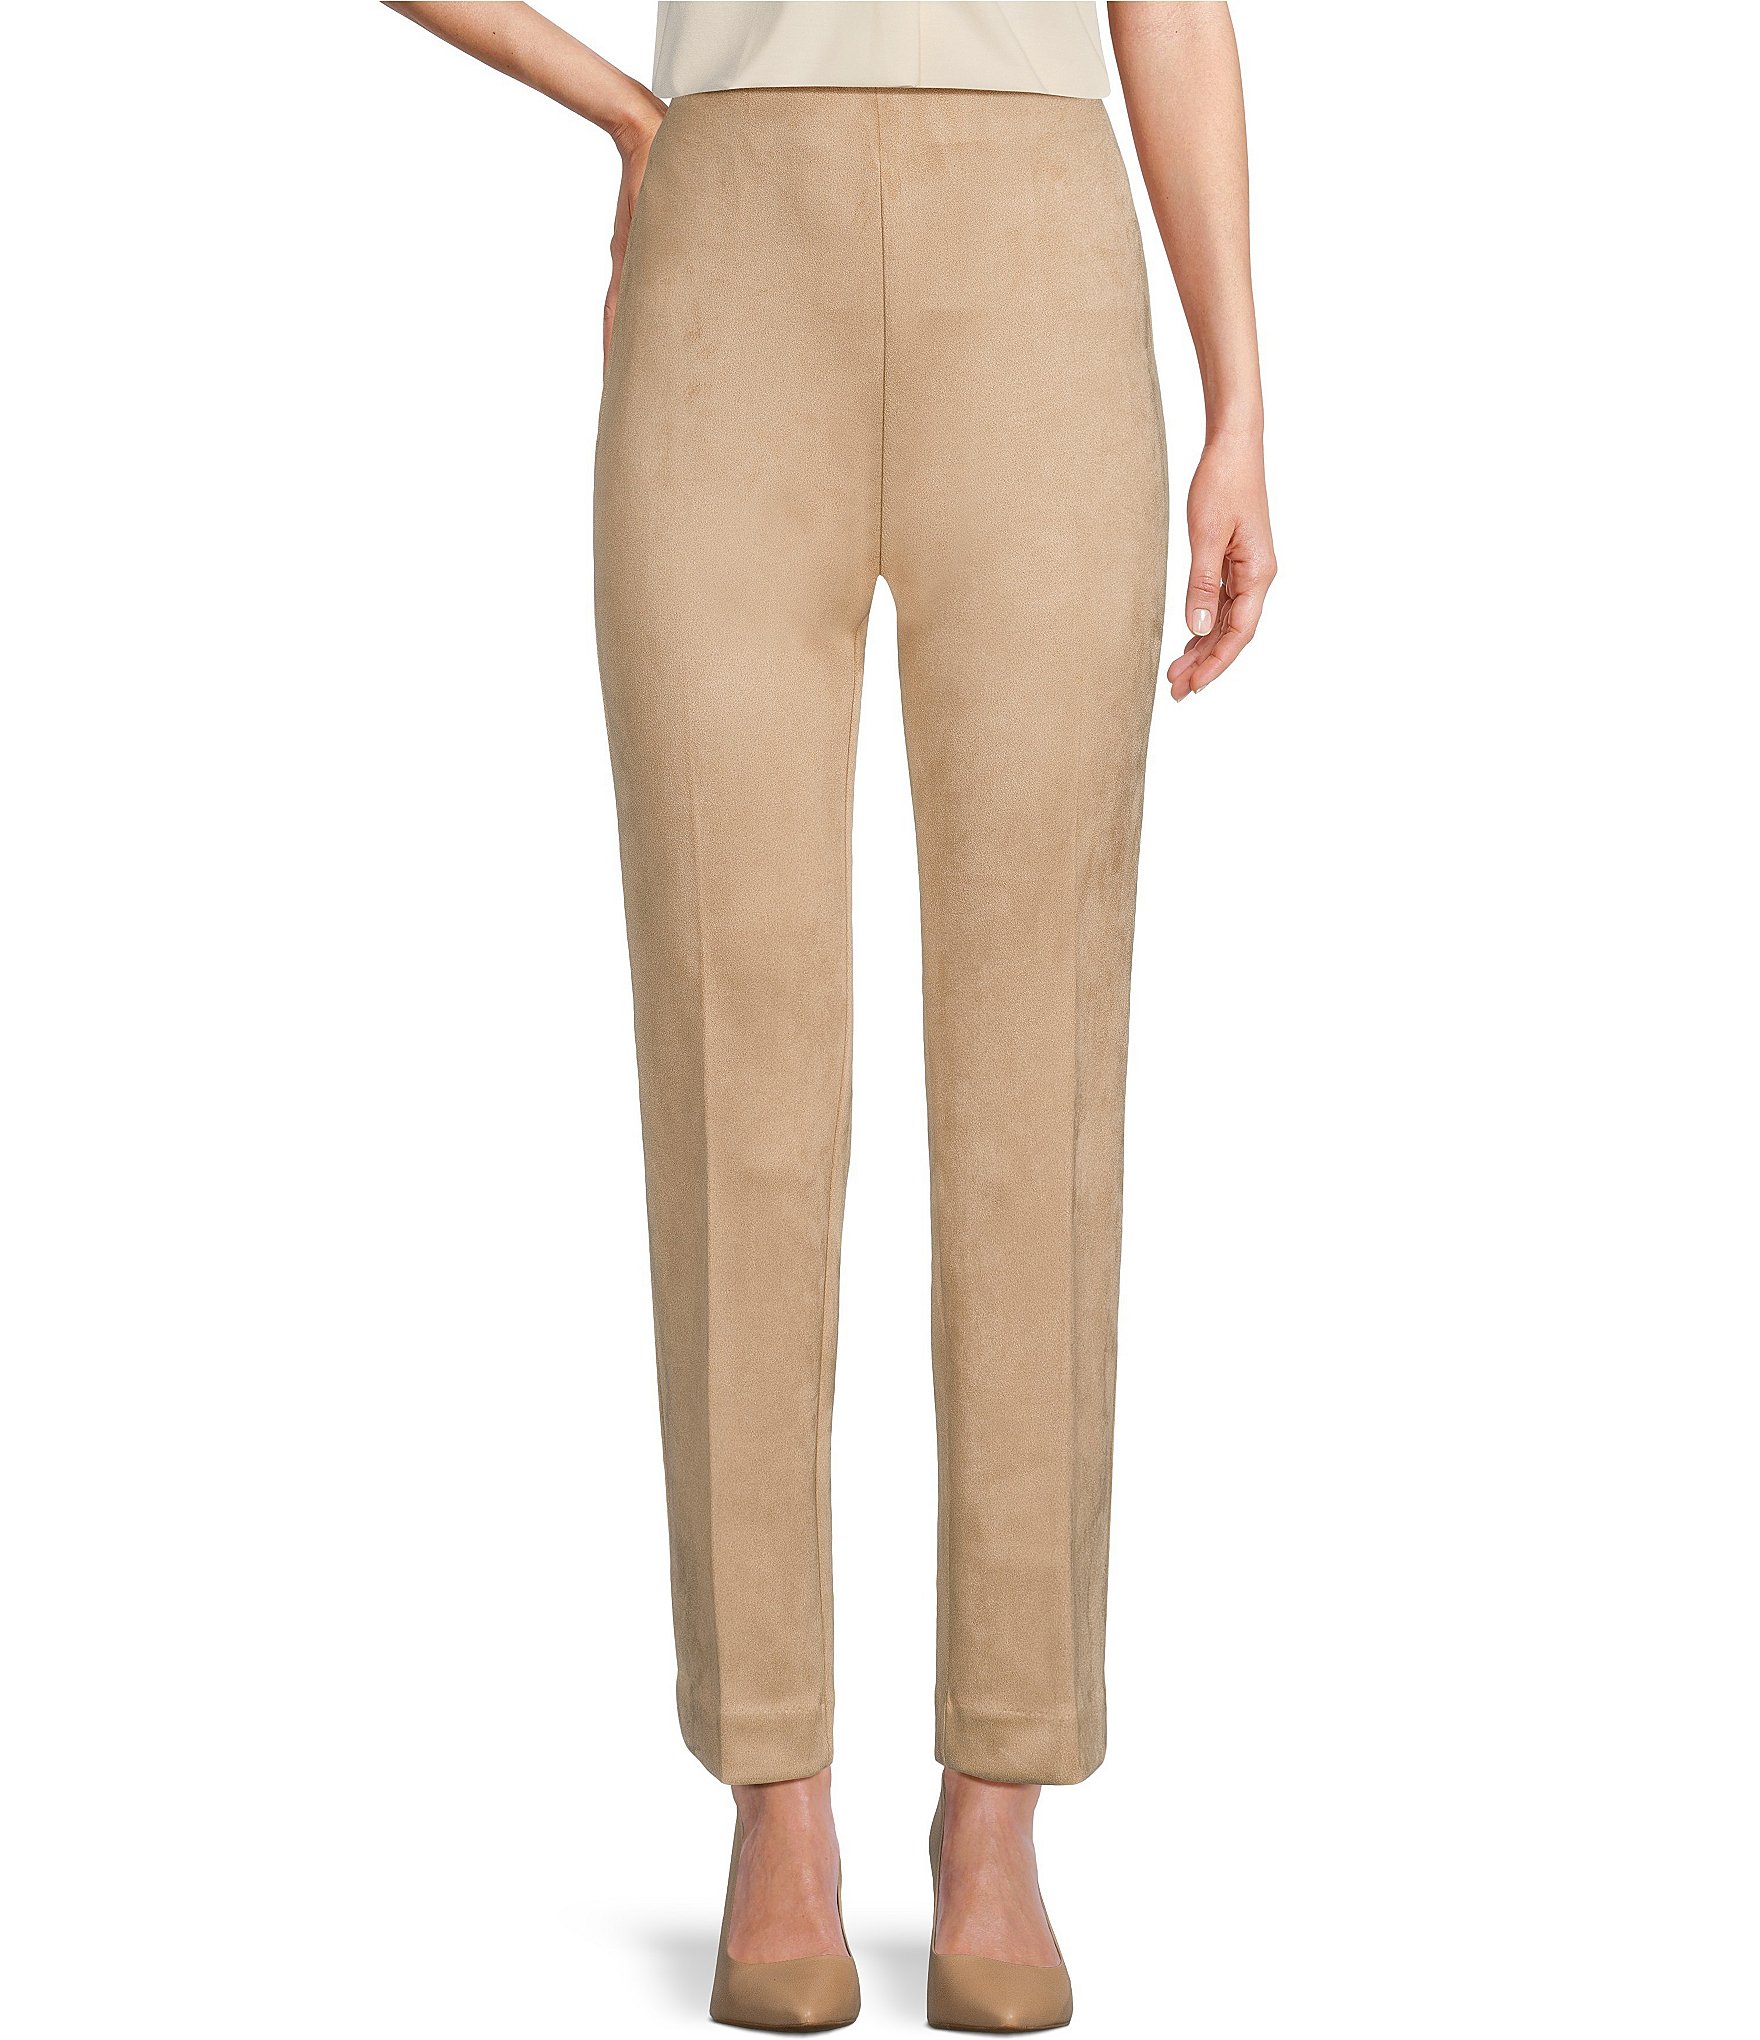 S.C. & CO. Women's Pull-on Ankle Pant